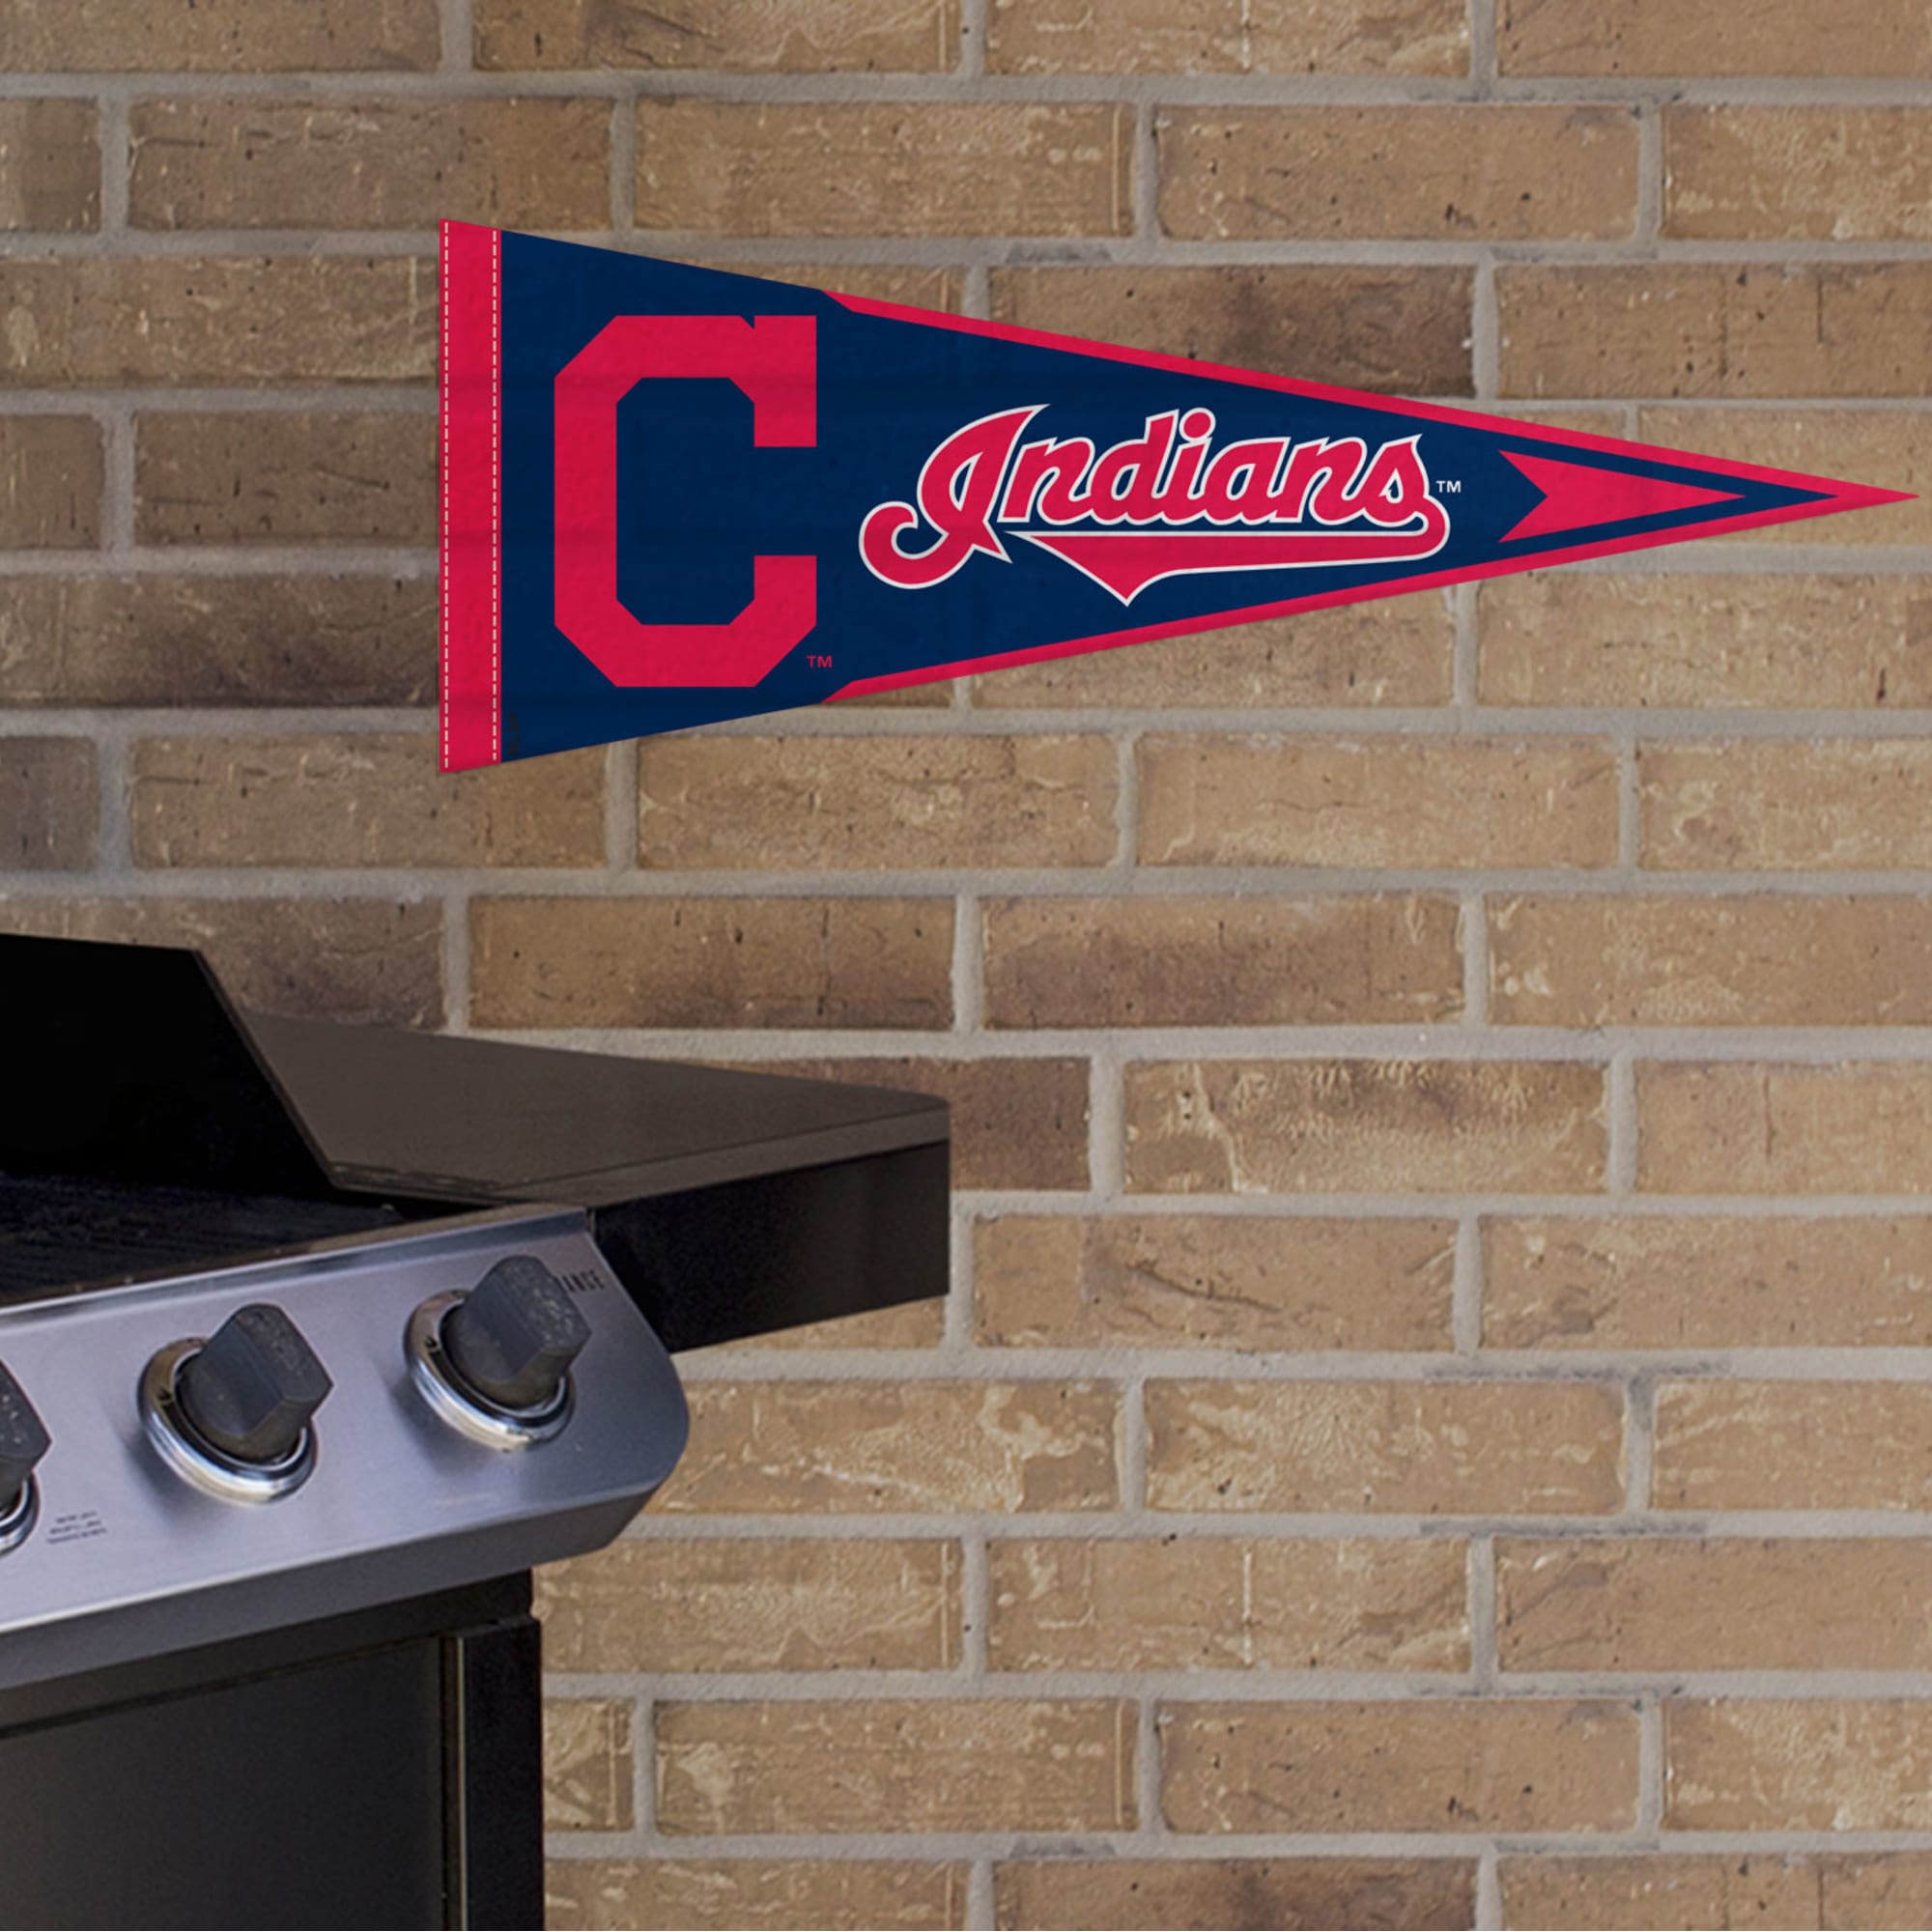 Cleveland Indians: Pennant - Officially Licensed MLB Outdoor Graphic 24.0"W x 9.0"H by Fathead | Wood/Aluminum